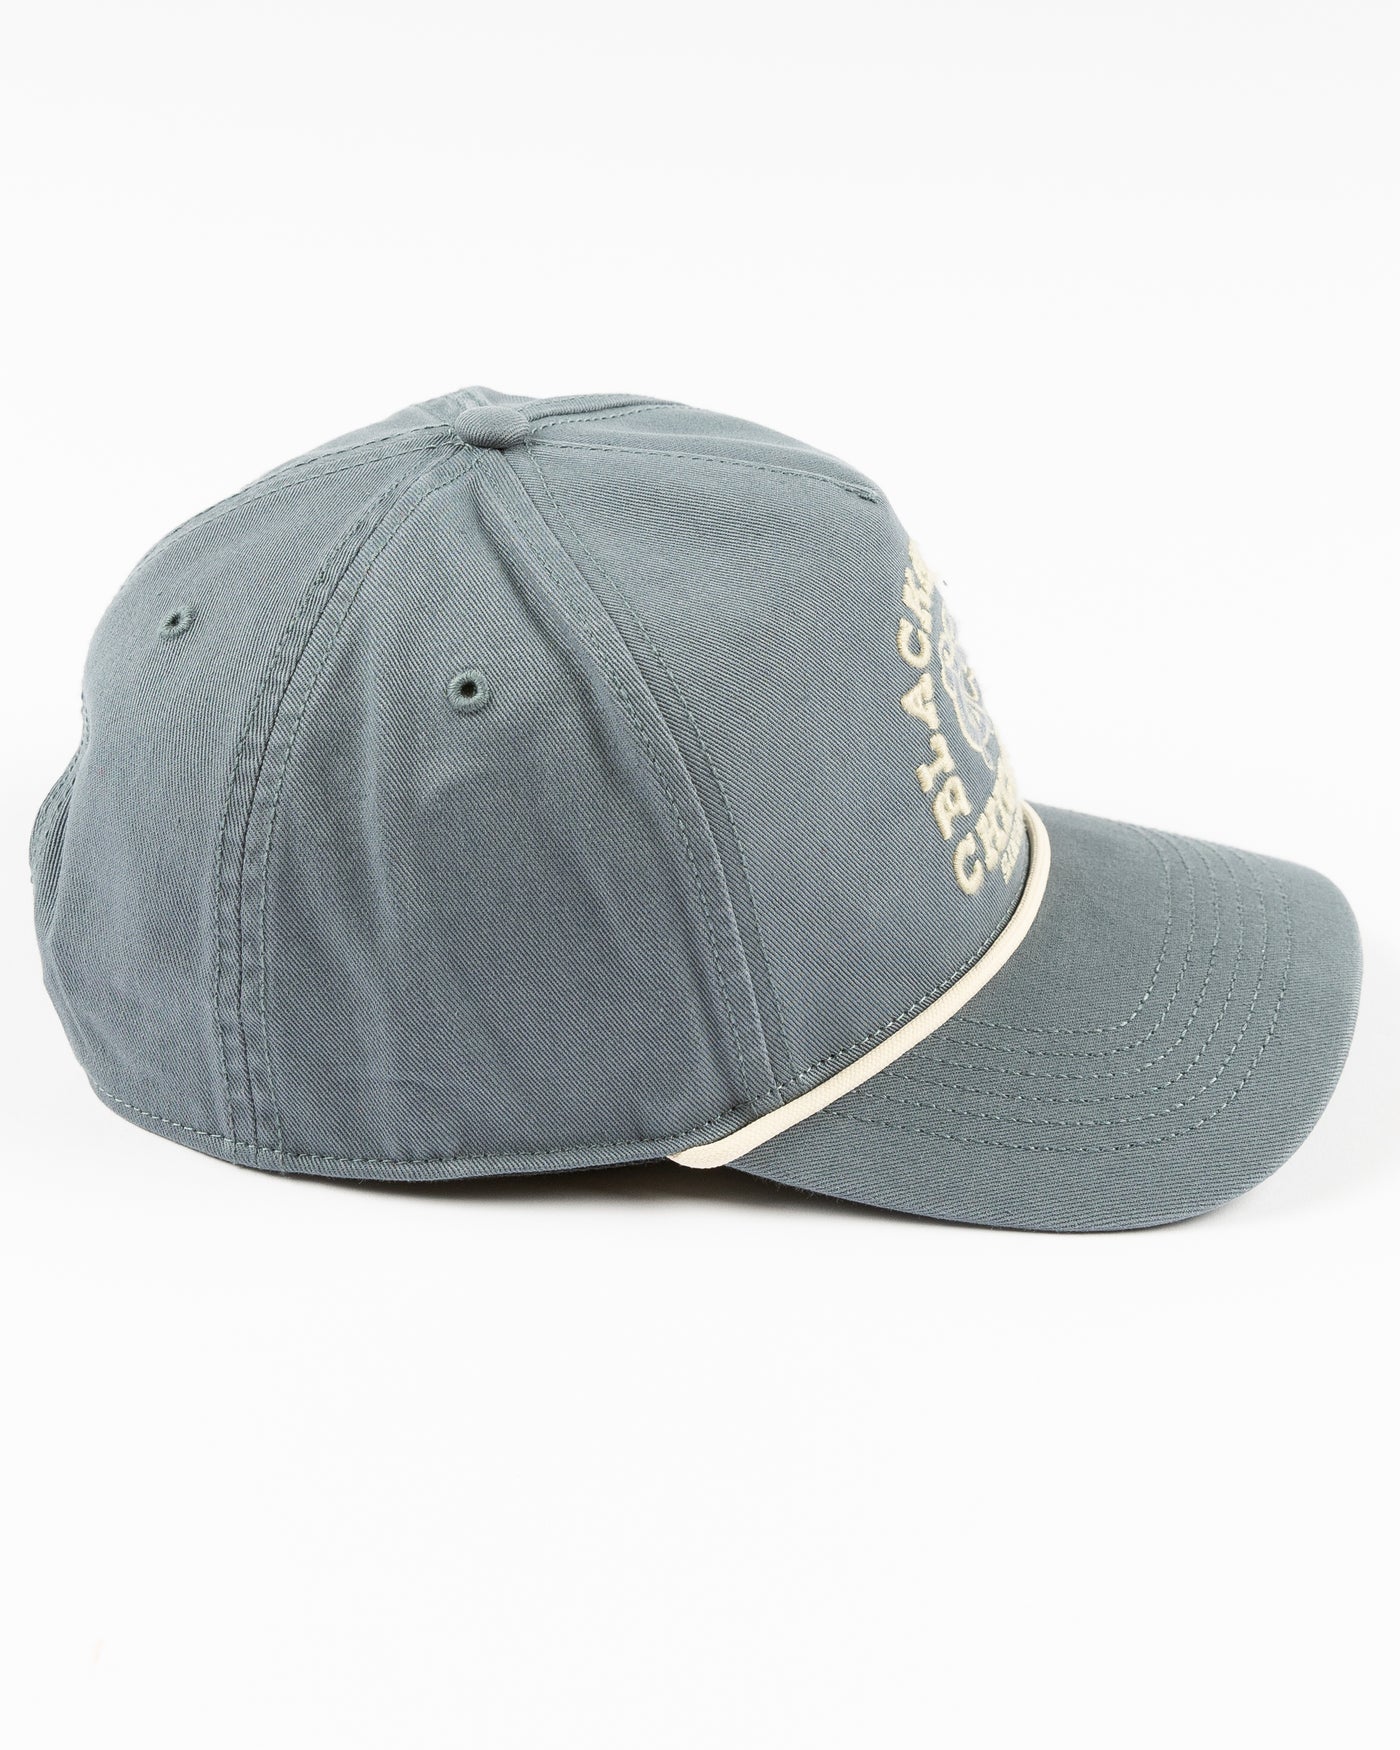 light blue '47 brand rope hat with embroidered Chicago Blackhawks wordmark and secondary logo on front - right side lay flat